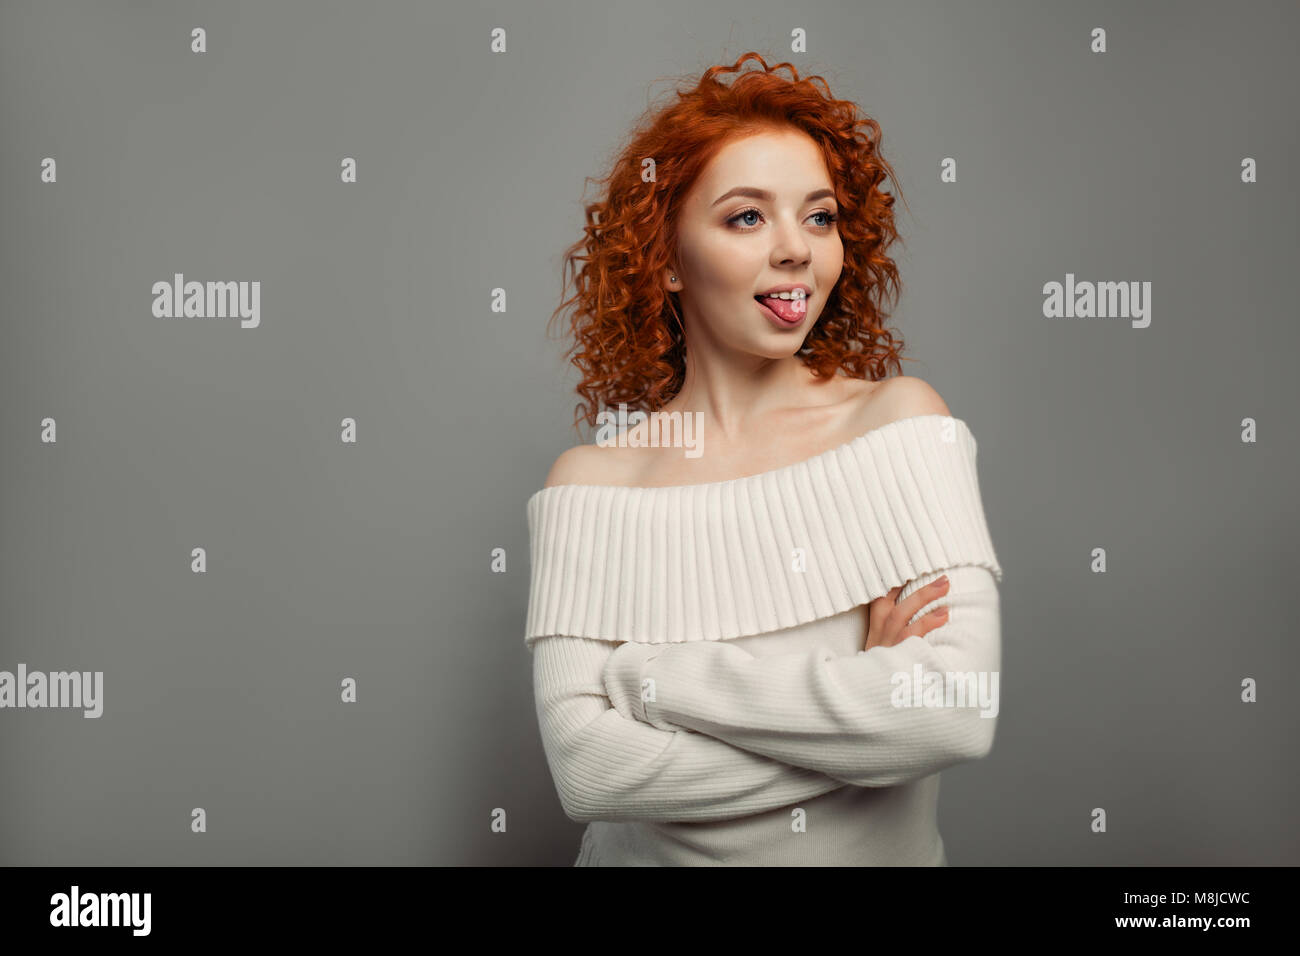 young cute redhead curly haired girl shows her tongue teasing on the gray backgroun in studio Stock Photo